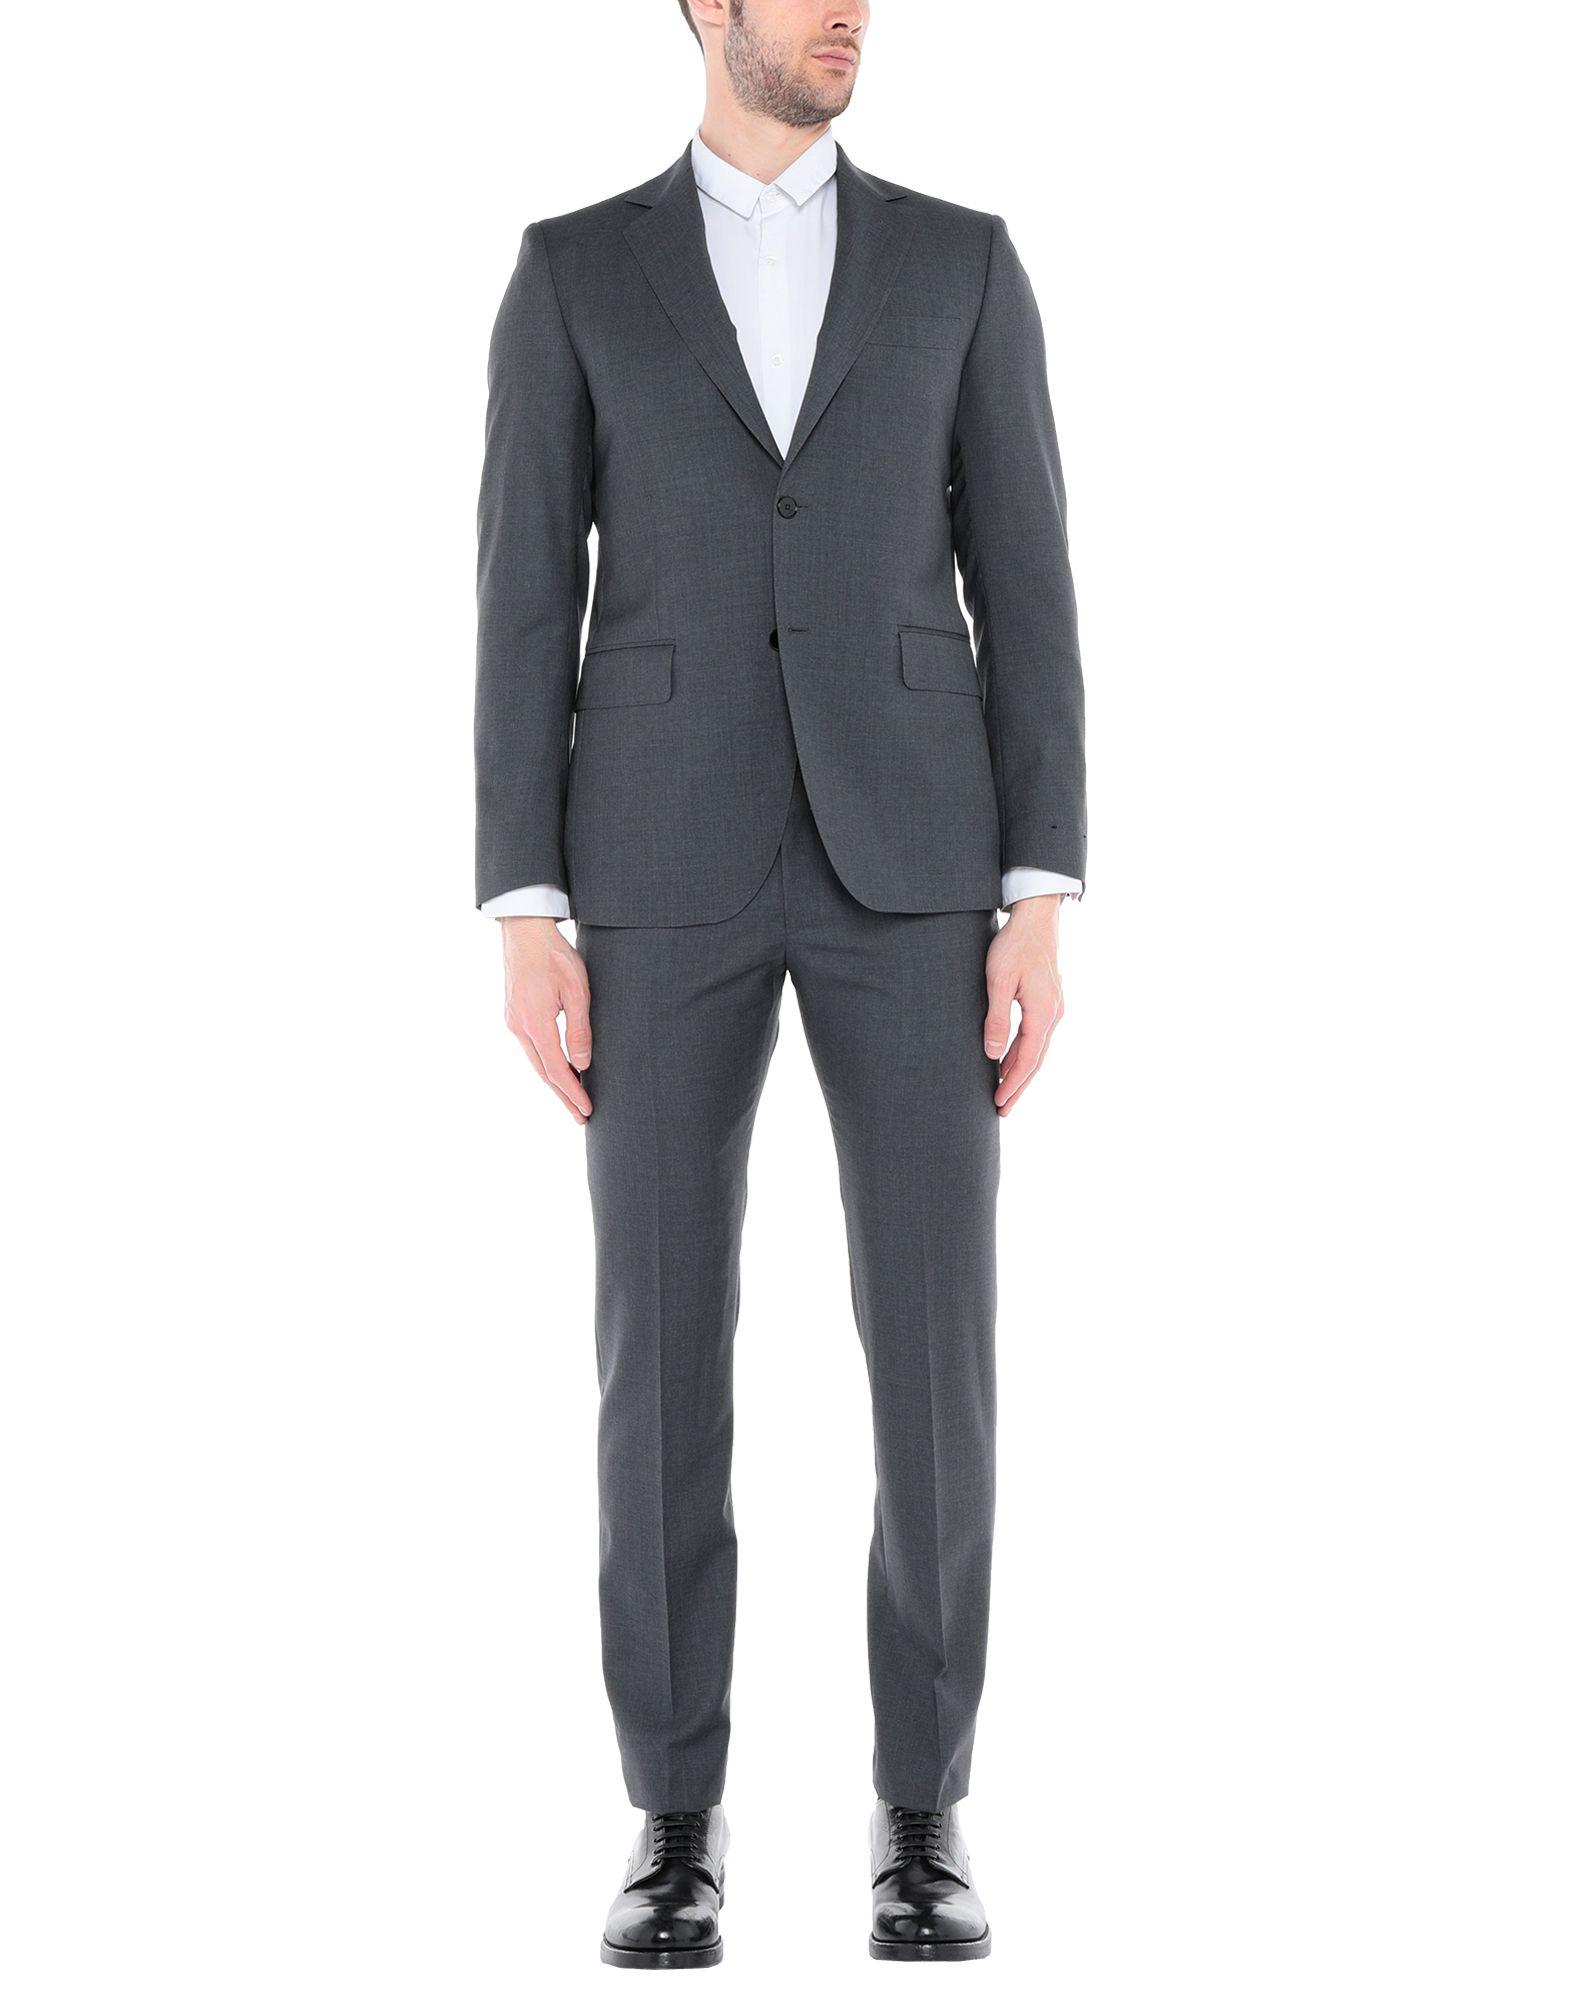 Tombolini Wool Suit in Lead (Gray) for Men - Lyst